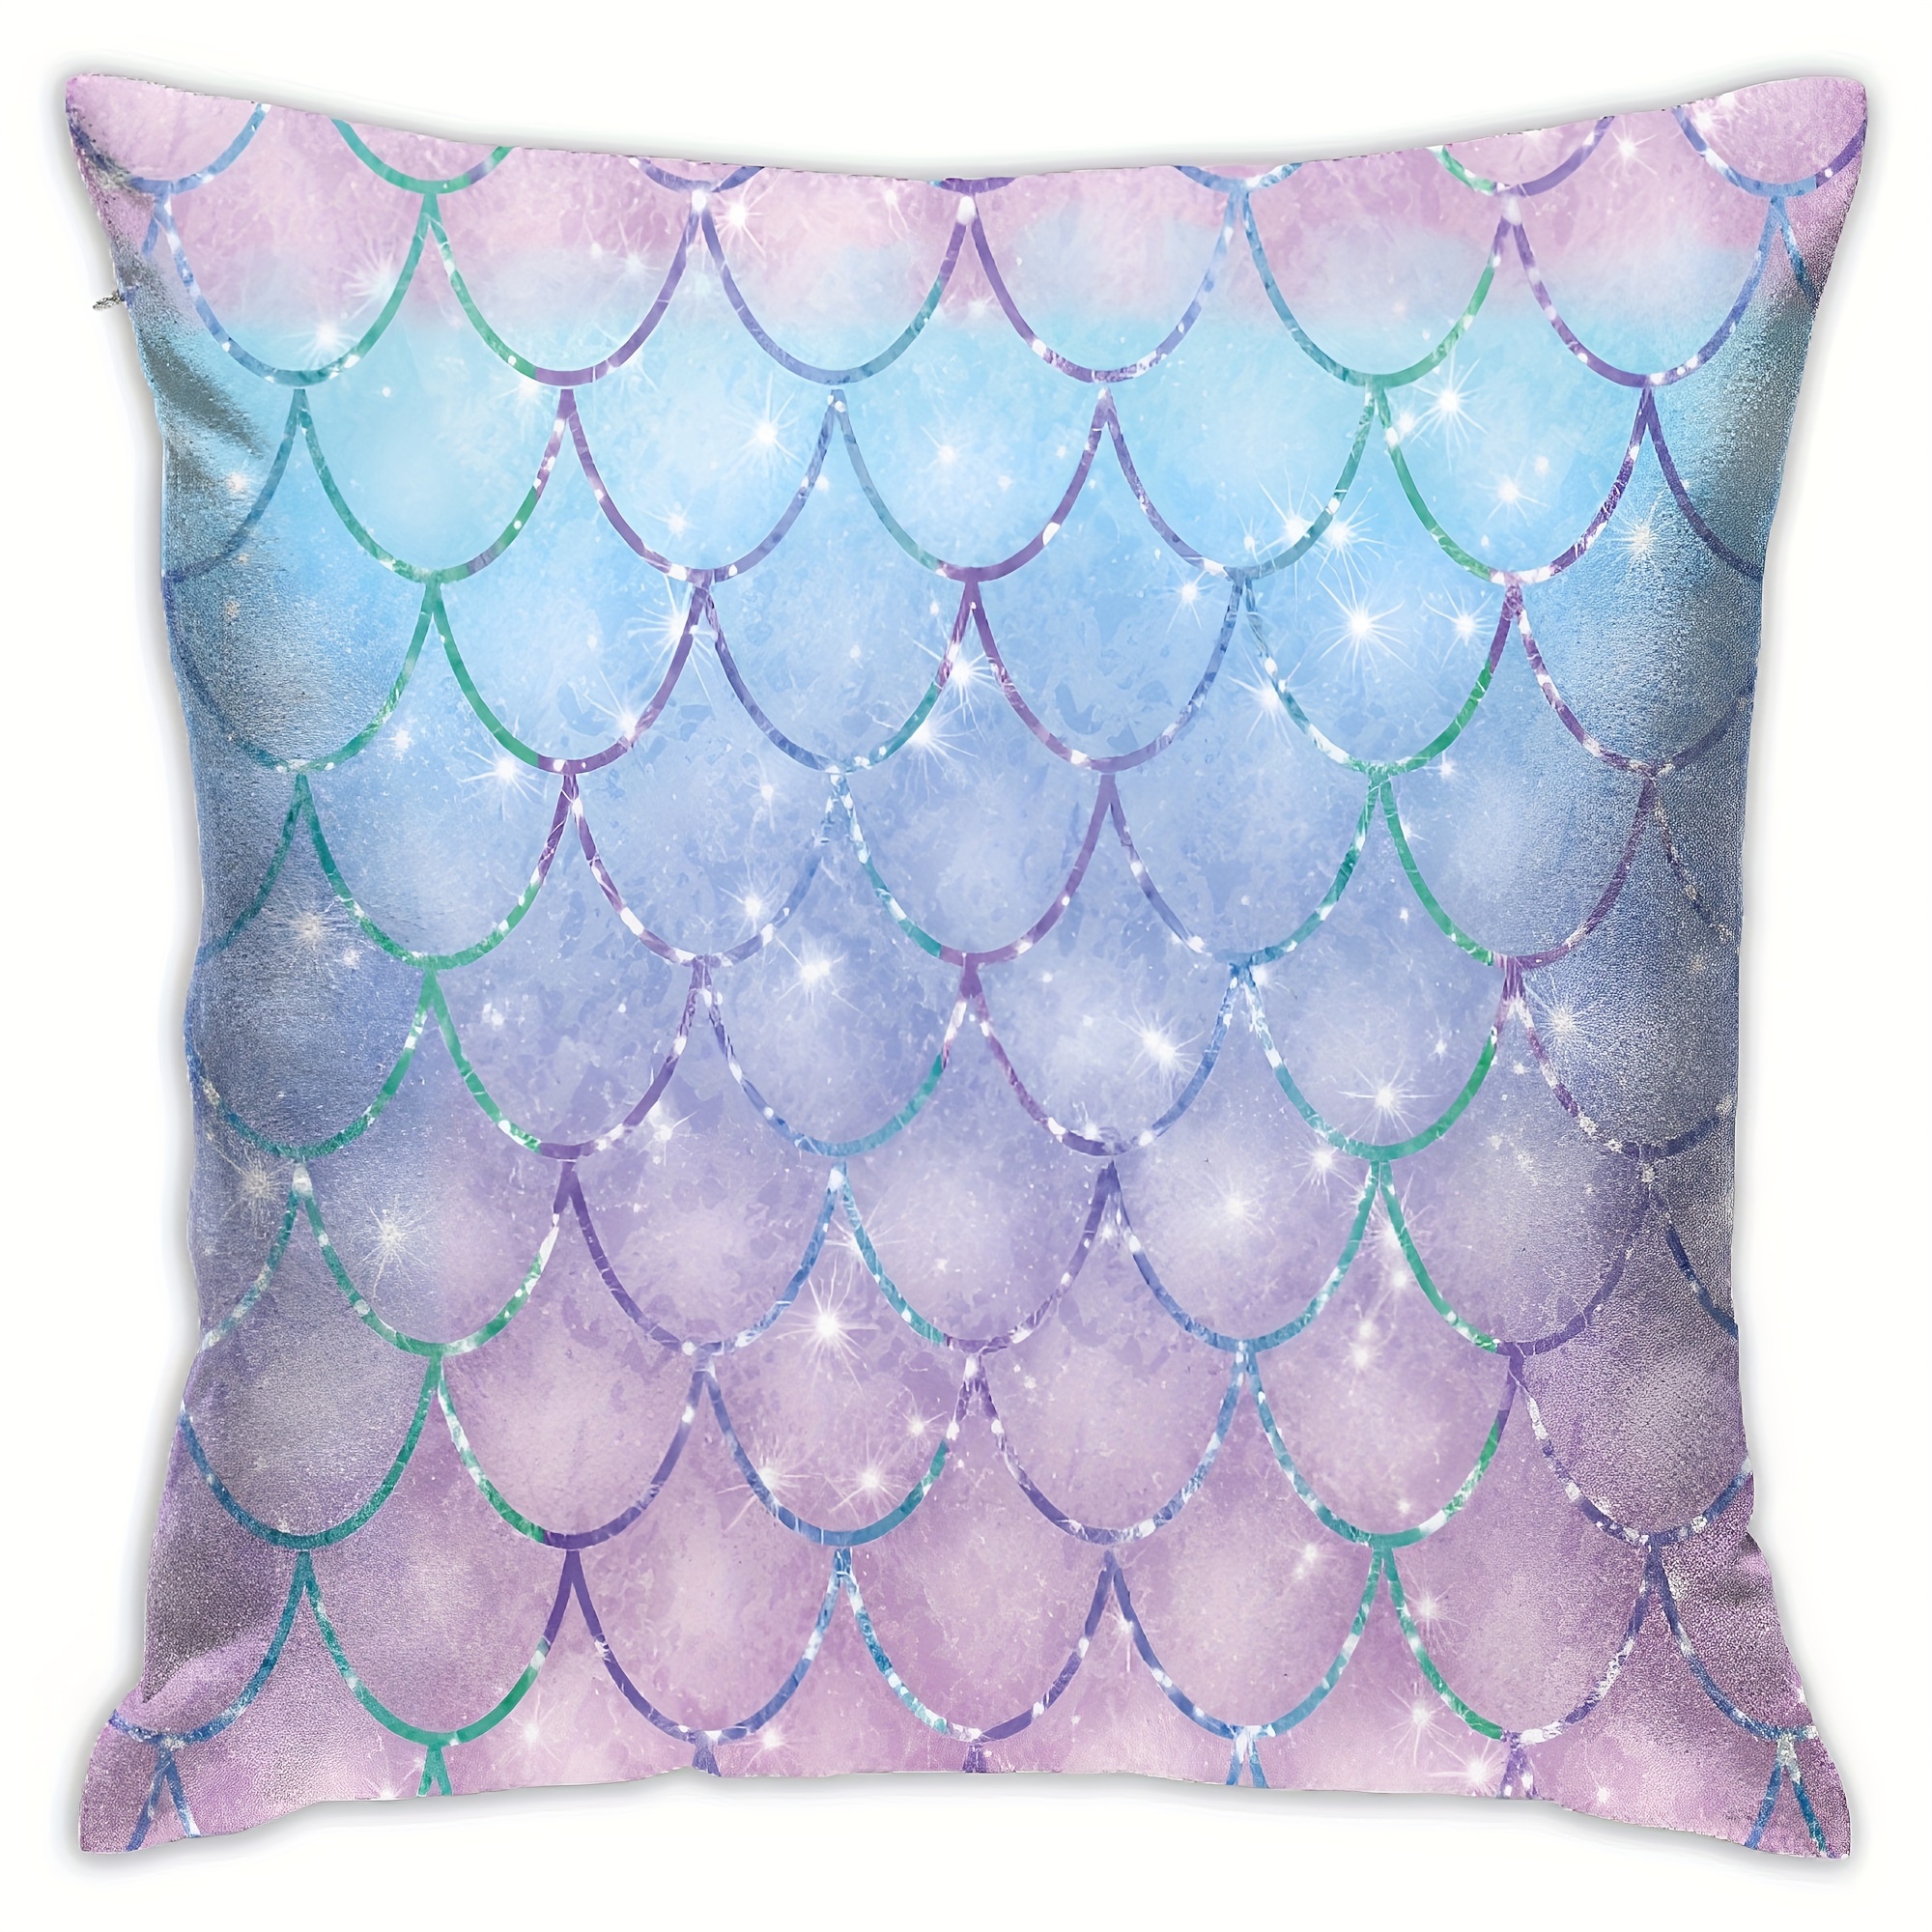 

1pc Throw Pillow Covers, Mermaid Throw Pillow Cover Pink Sequins Fish Scales Heavy Duty Decorative Pillow Case Home Decor Square, 18x18 Inch